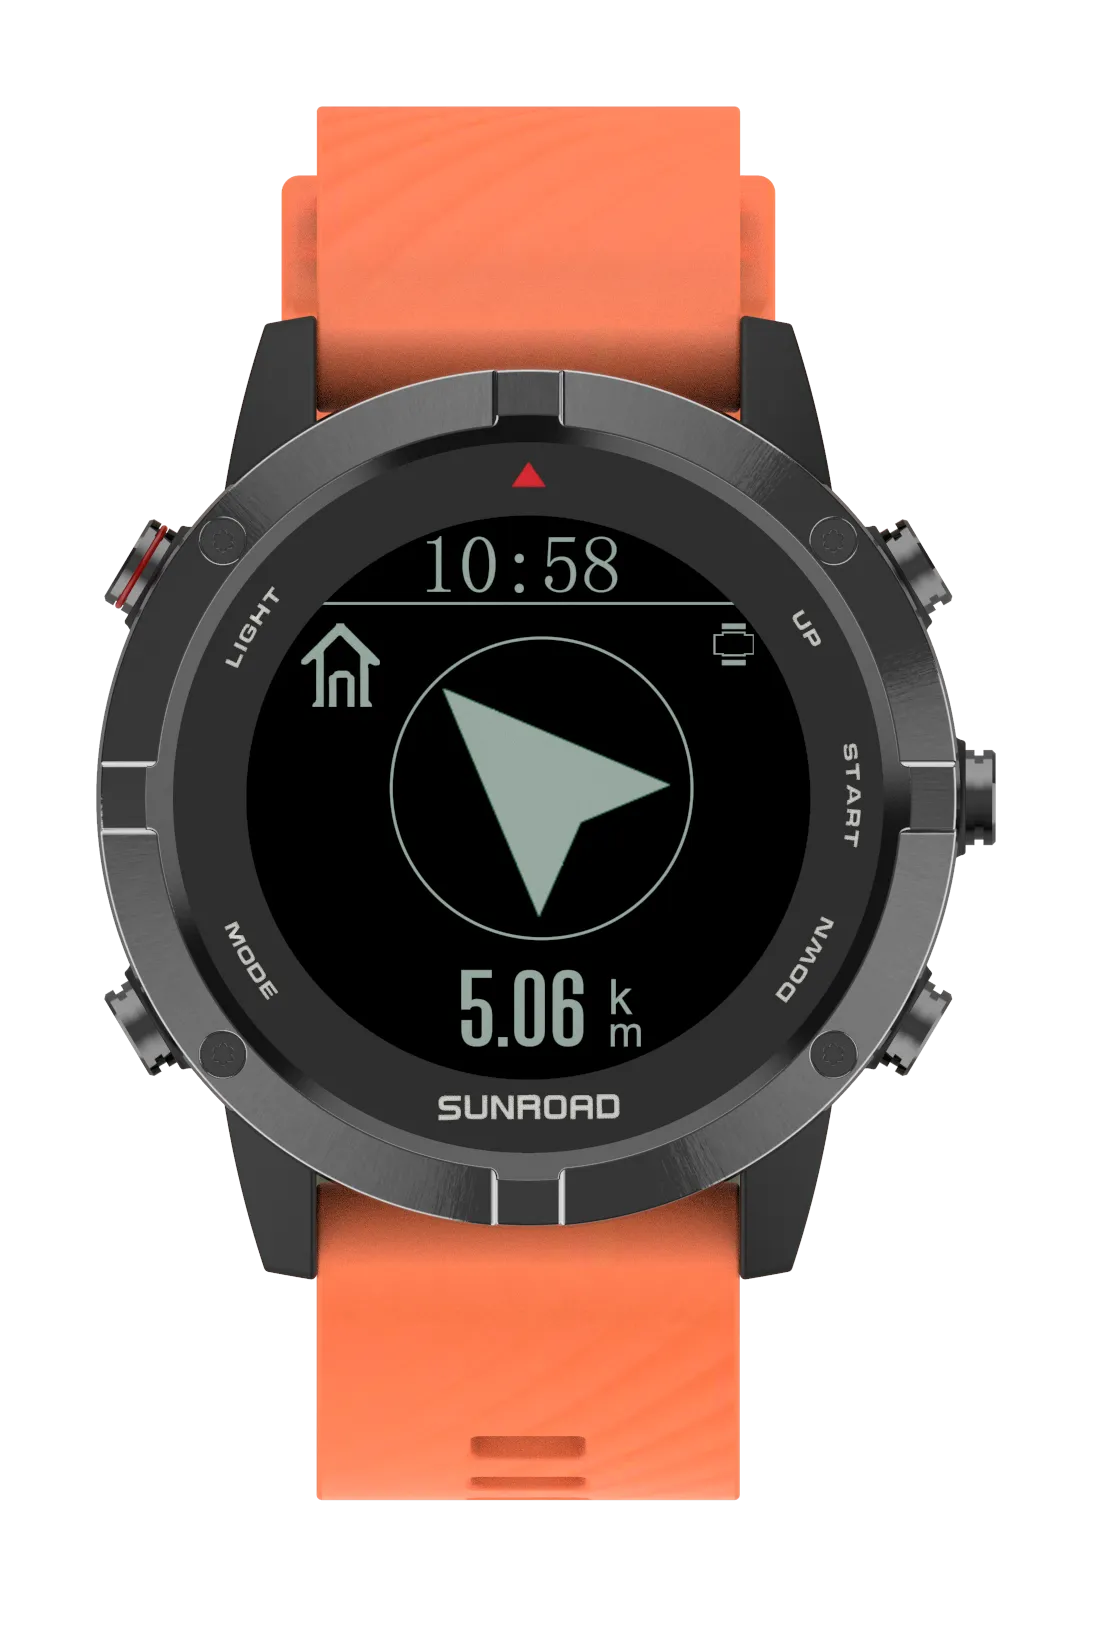 GPS Outdoor Compass Watch | Cross-Country Riding & Mountaineering | Android App